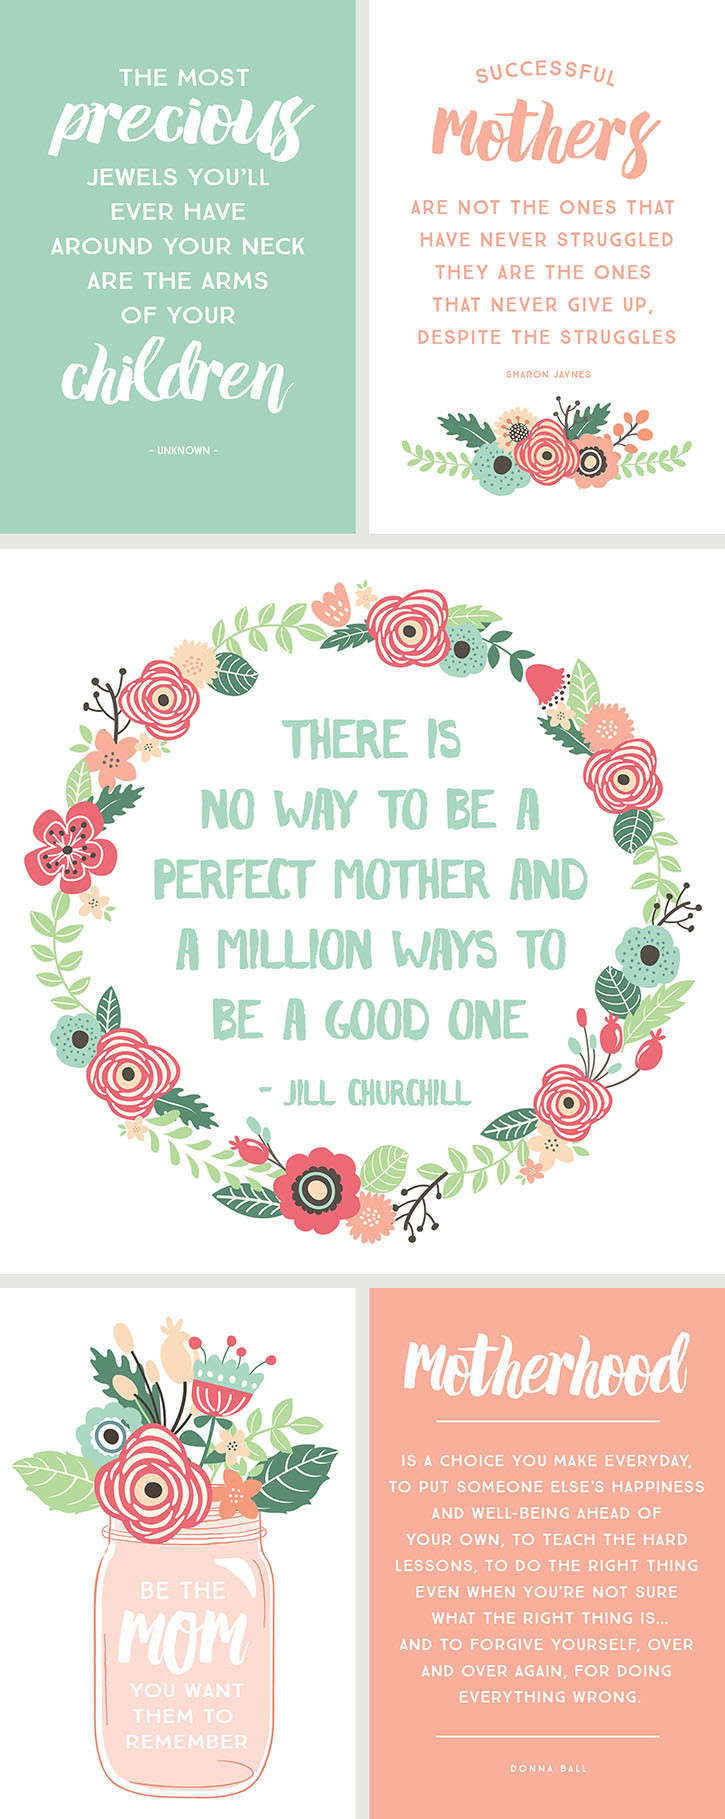 Pinterest Mothers Day Quotes
 5 Inspirational Quotes for Mother s Day